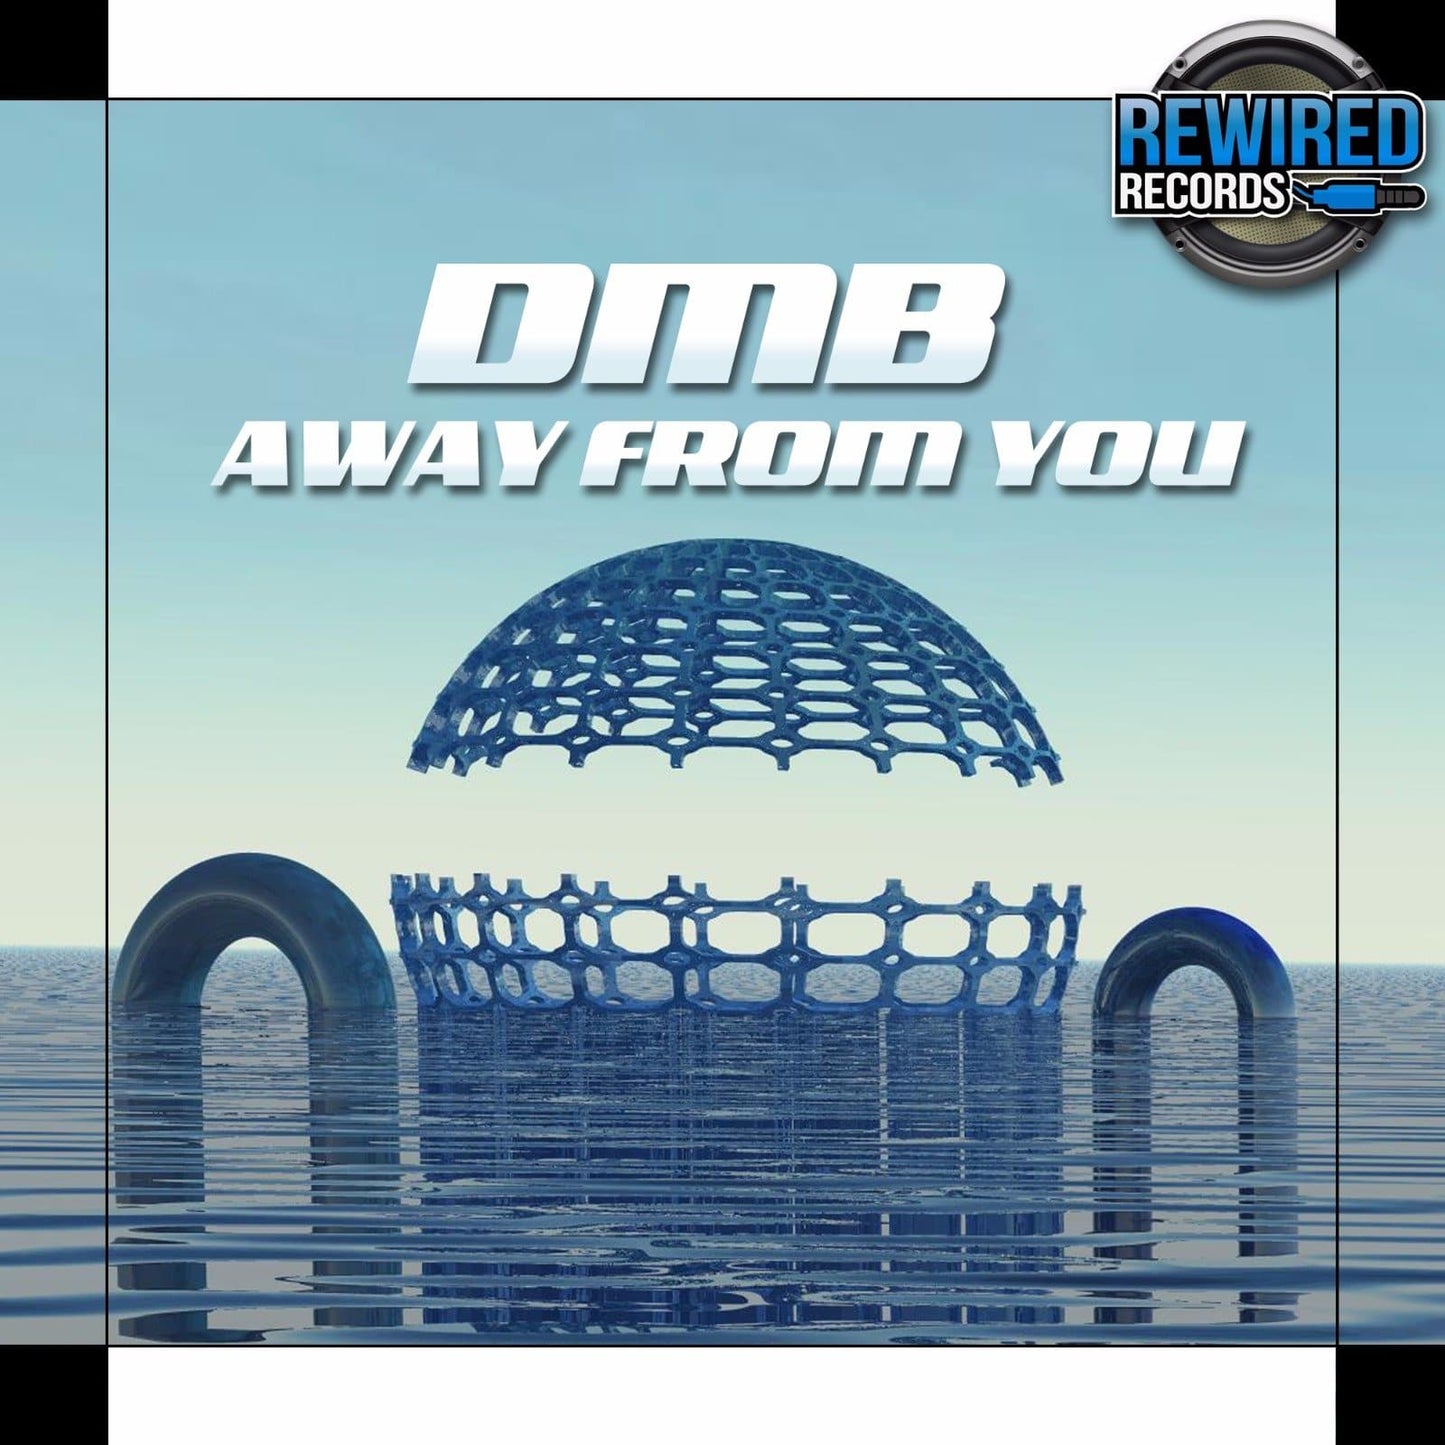 DMB - Away From You - Rewired Records